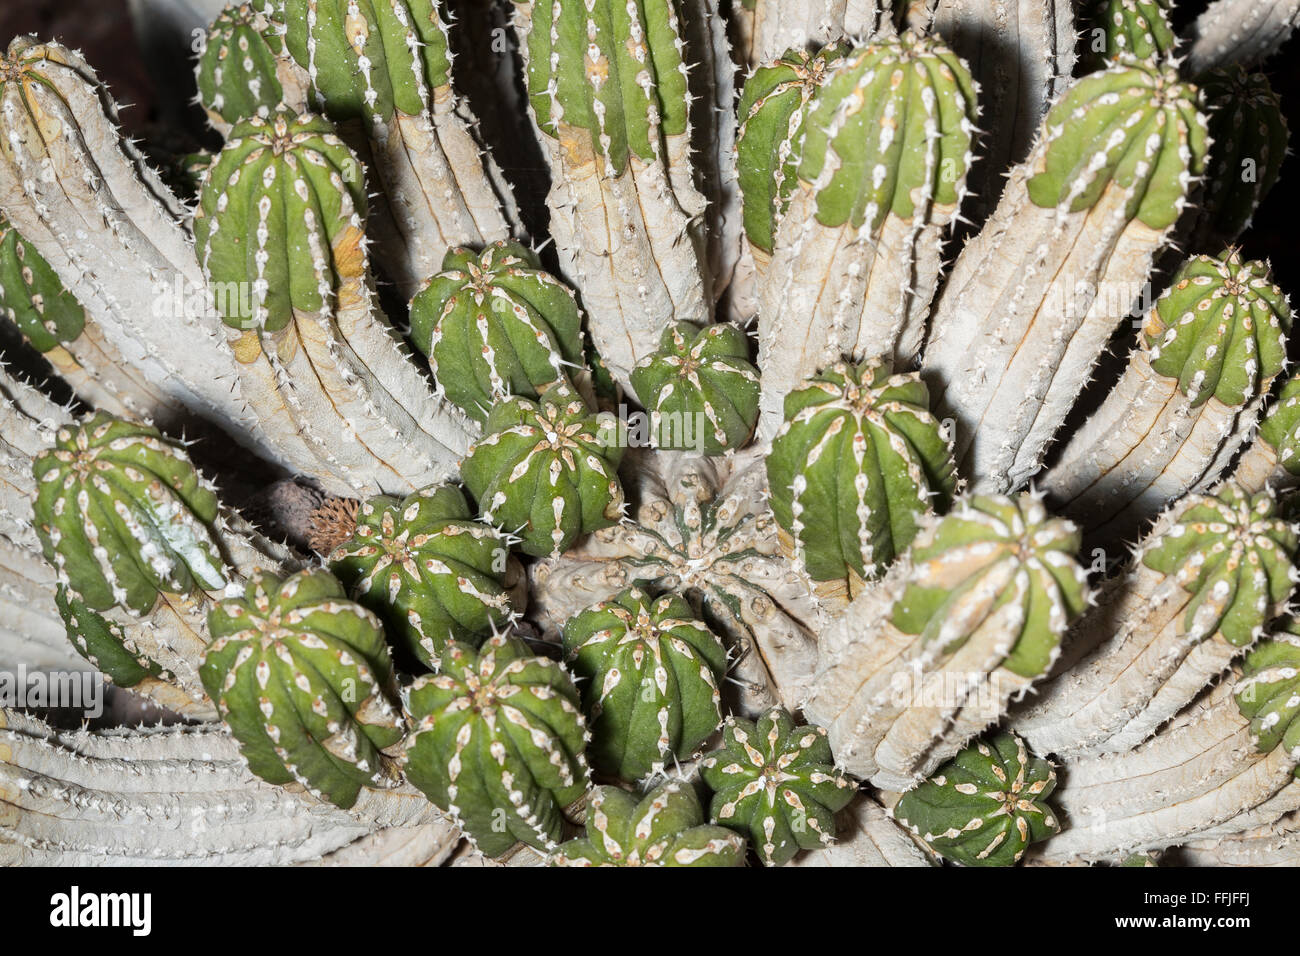 Details of a Euphorbia officinarum succulent plant. This african cactus can grow up to 1.5 m and even in good soil conditions an Stock Photo